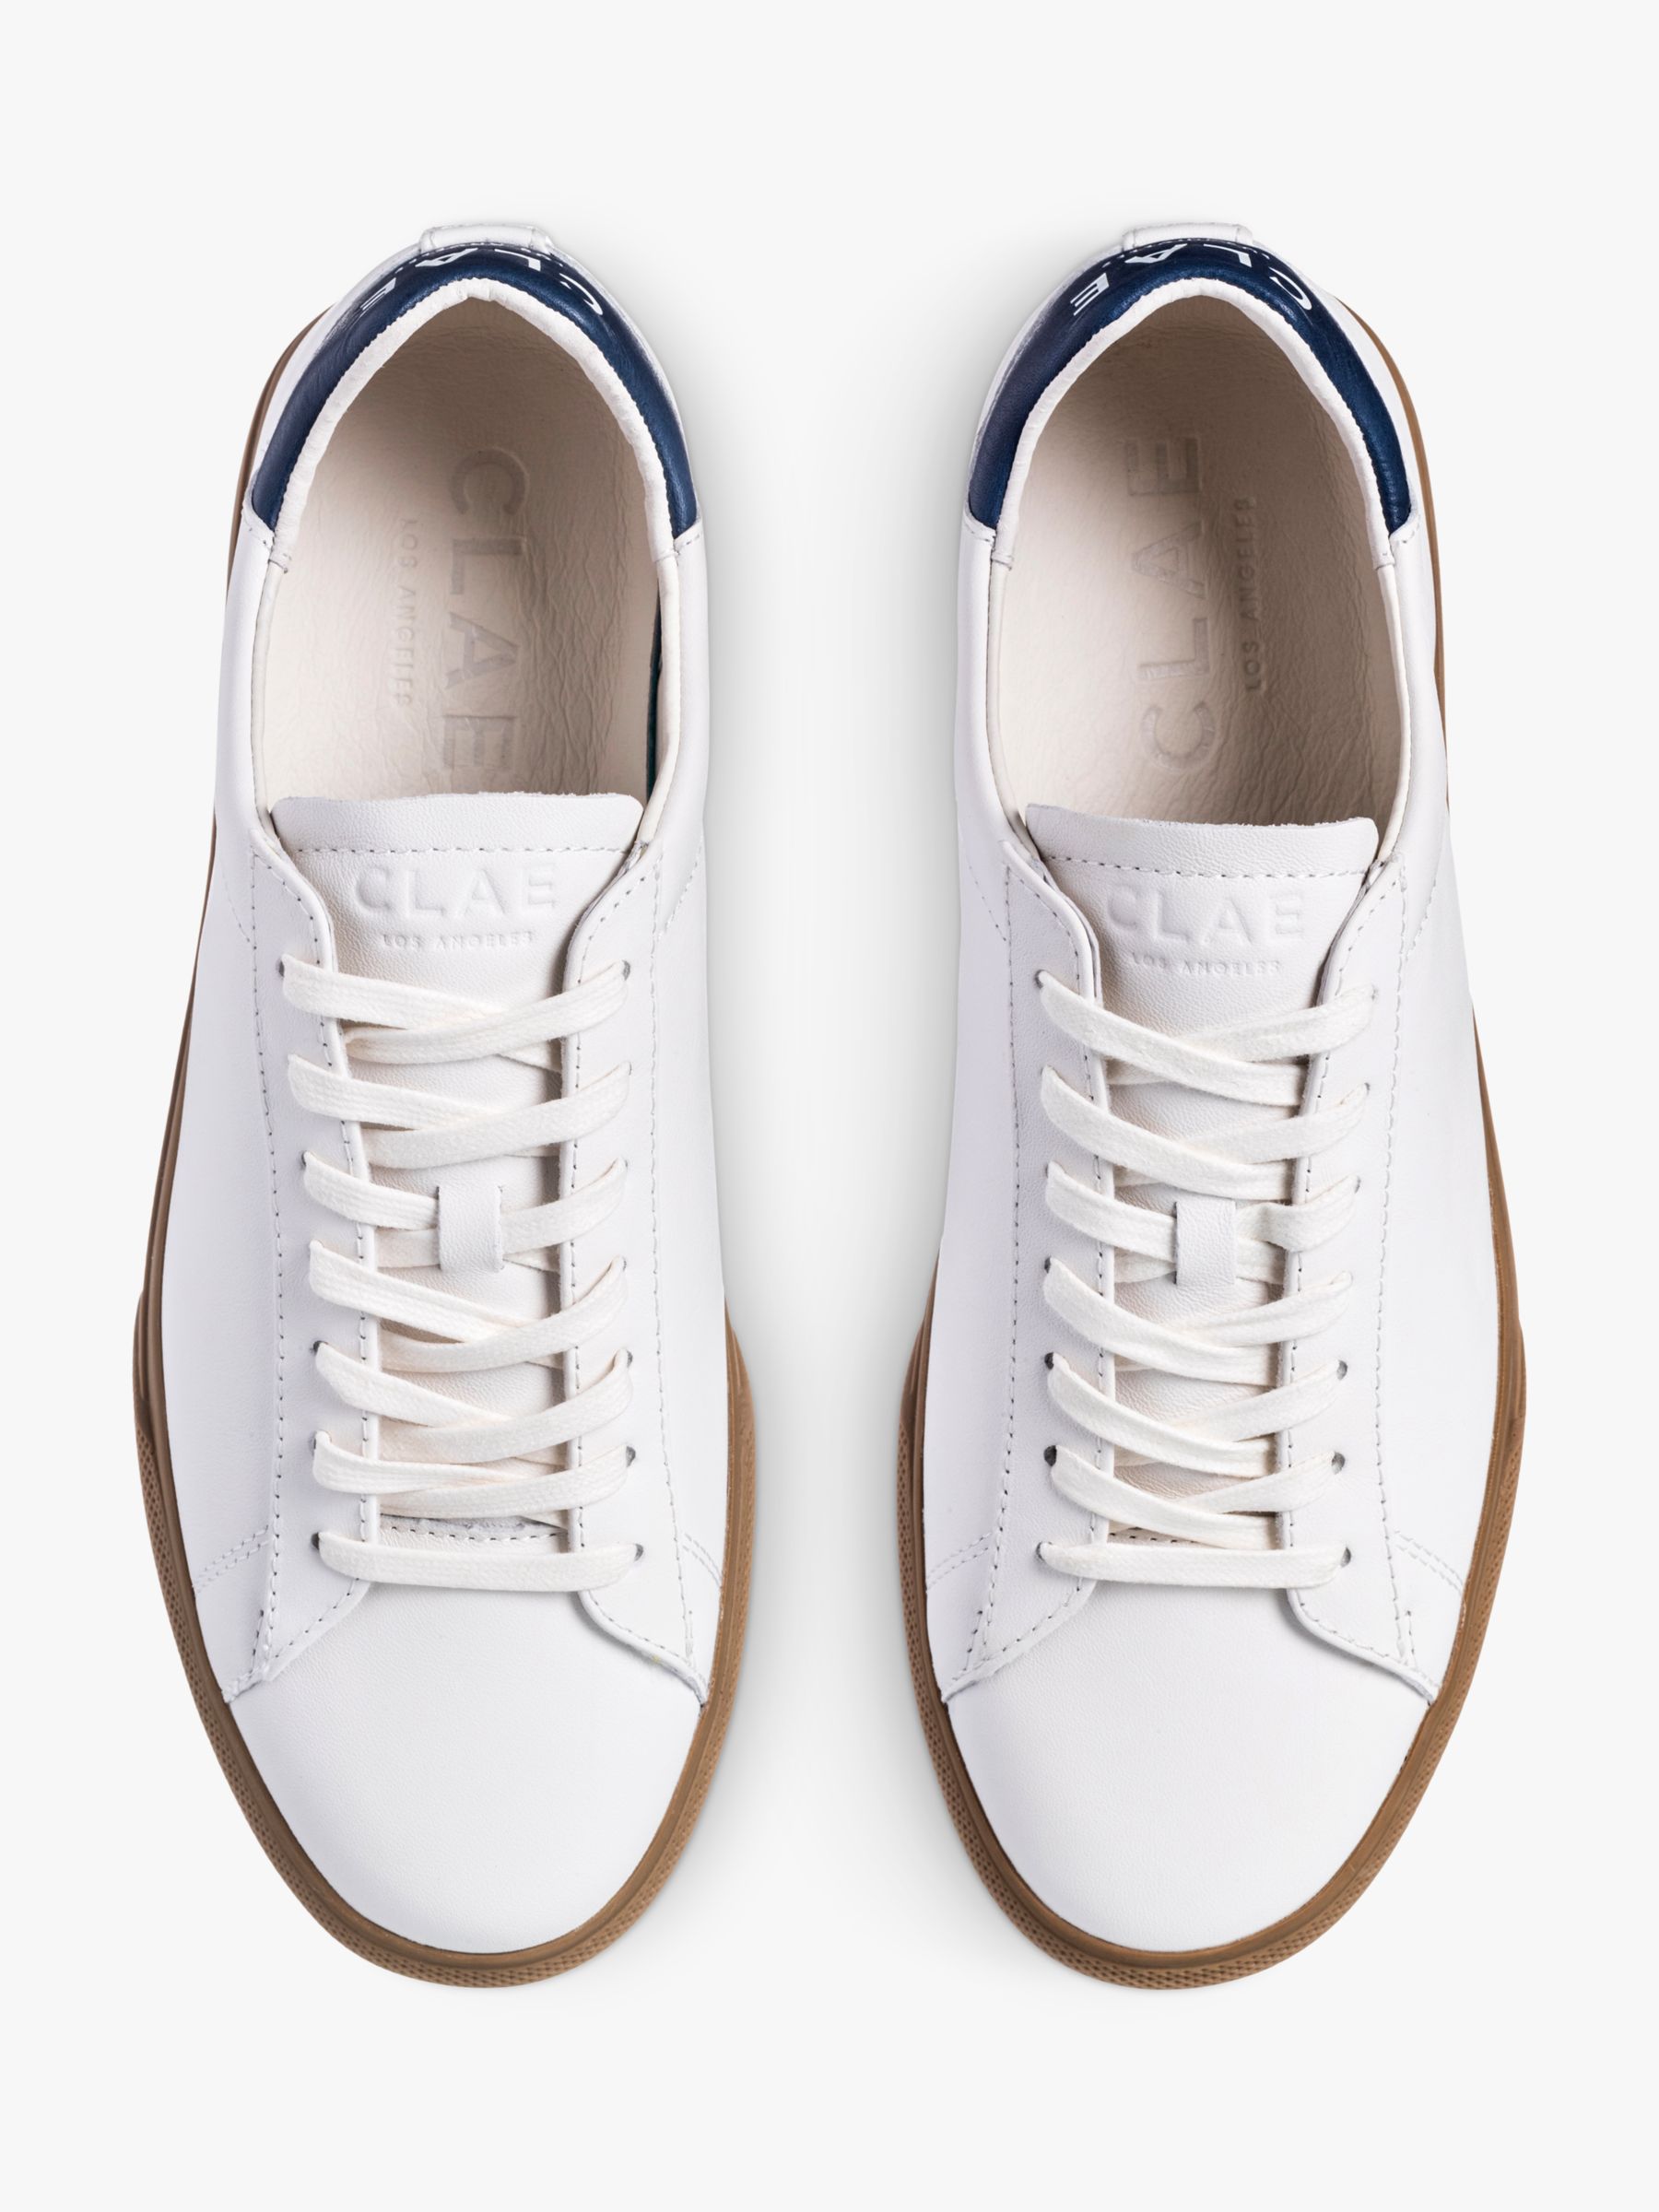 Buy CLAE Bradley Venice Leather Lace Up Trainers Online at johnlewis.com